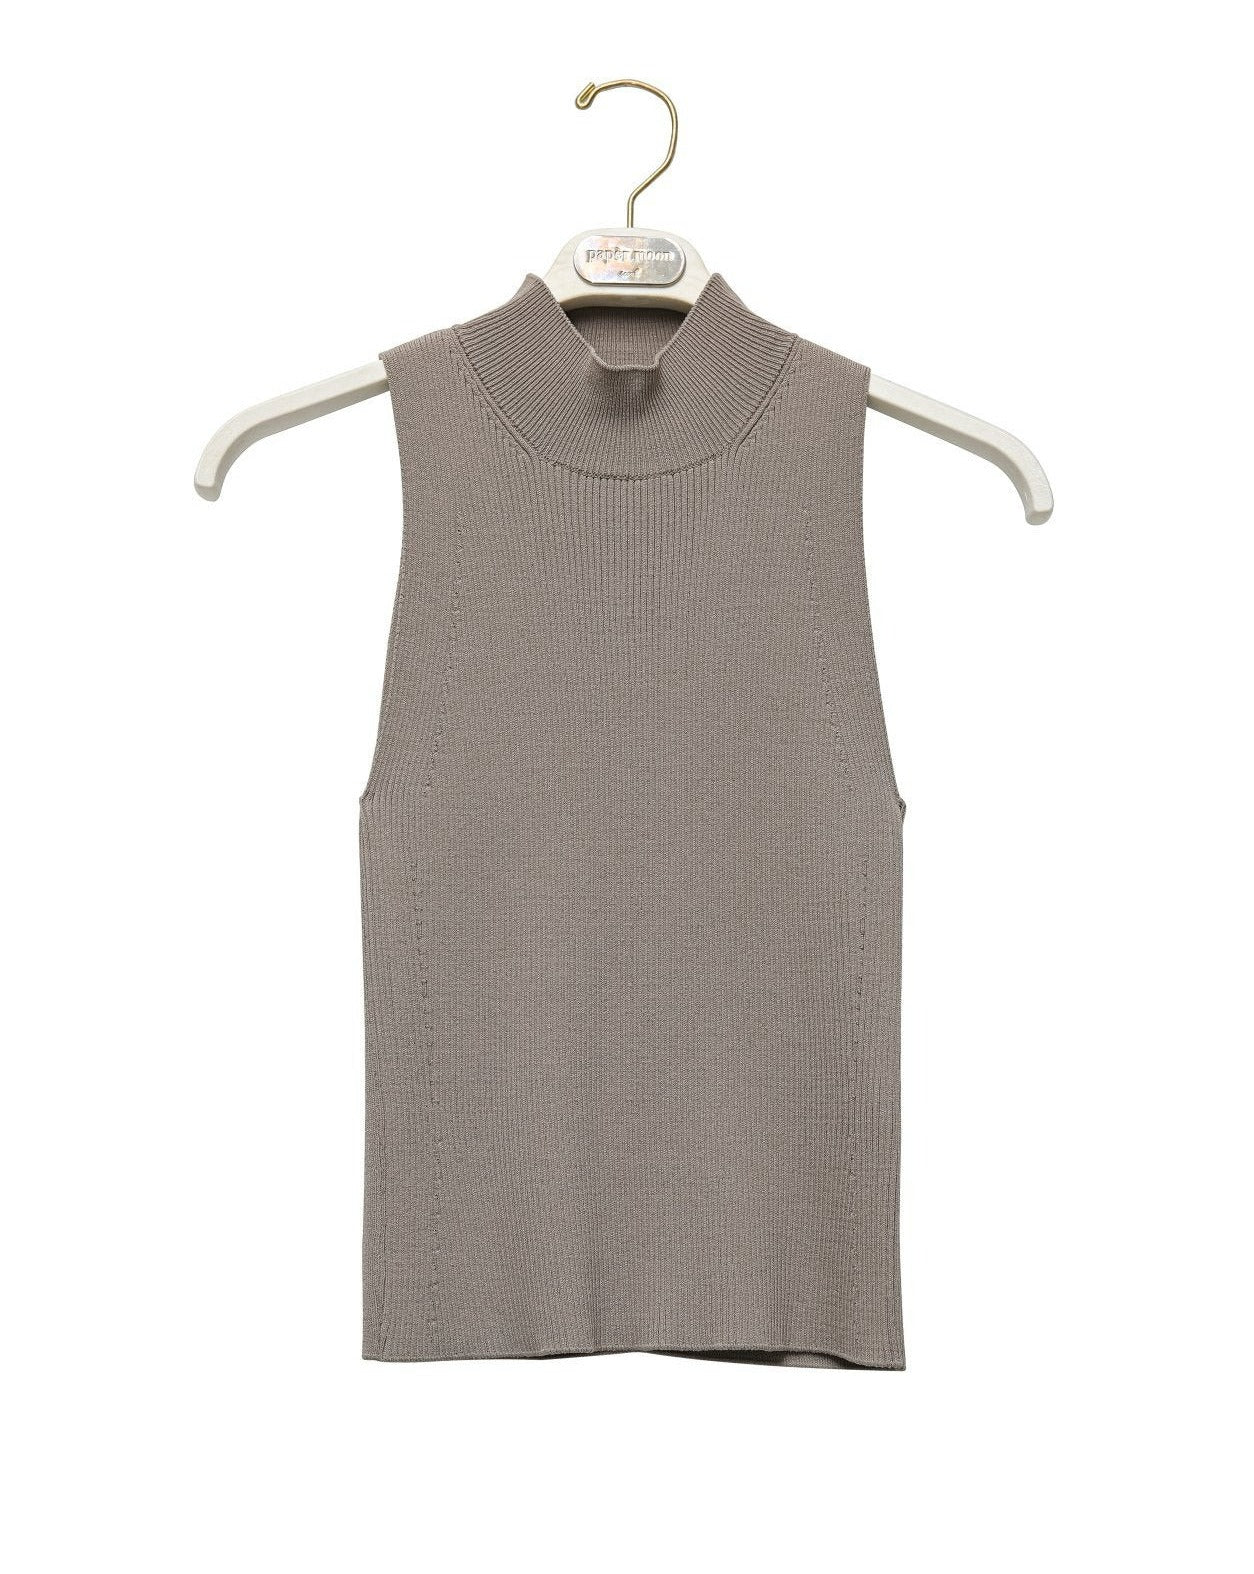 [PAPERMOON] SS / High Neck Ribbed Sleeveless Cropped Knit Top